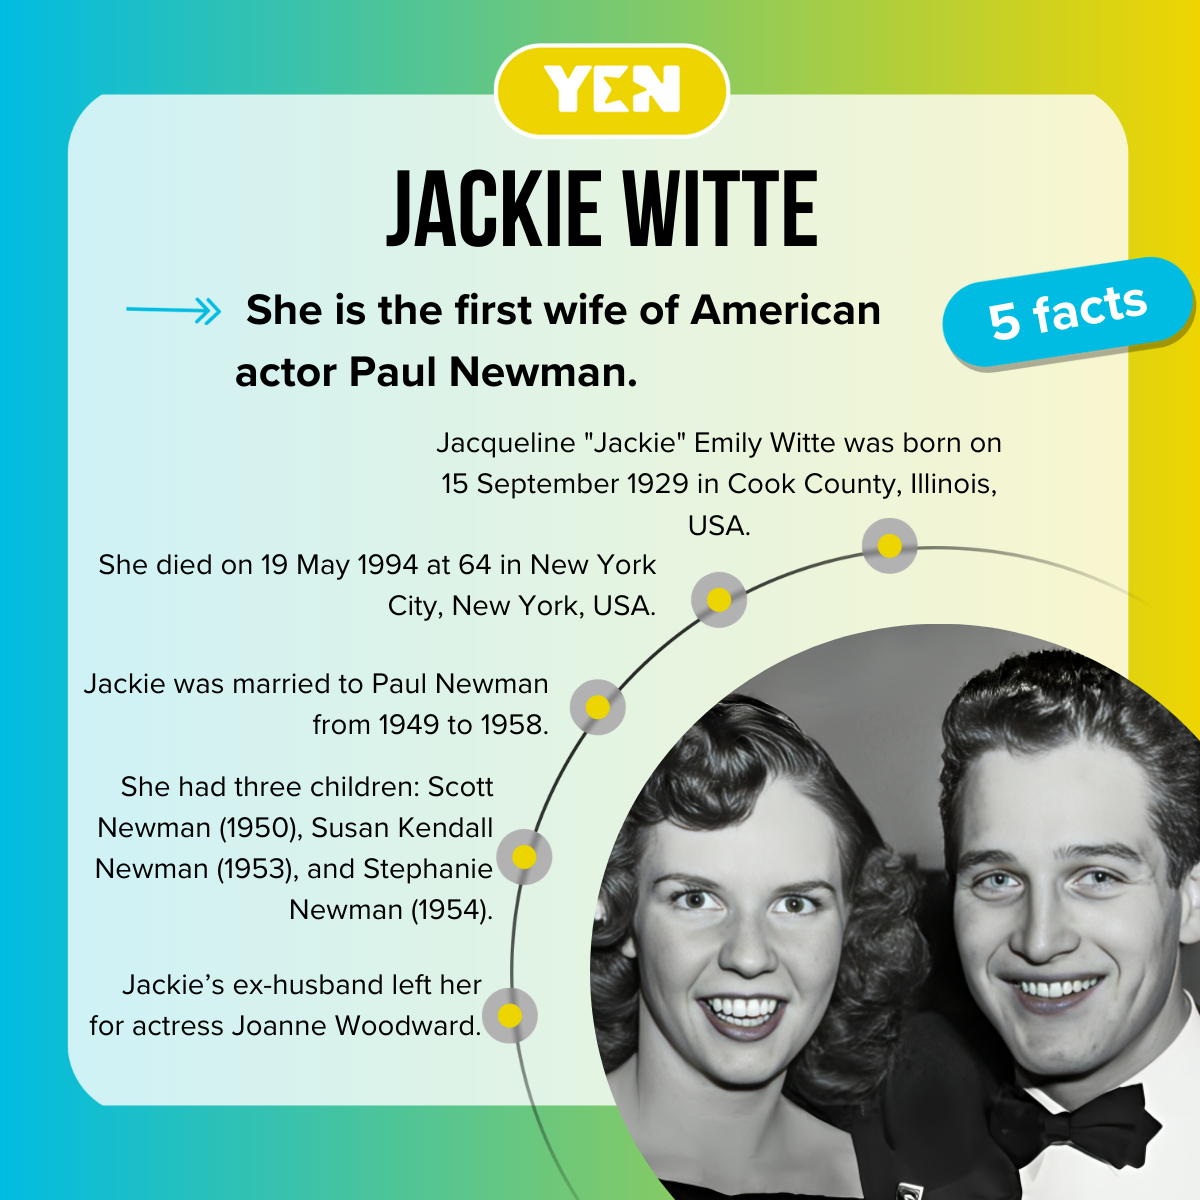 Five facts about Jackie Witte